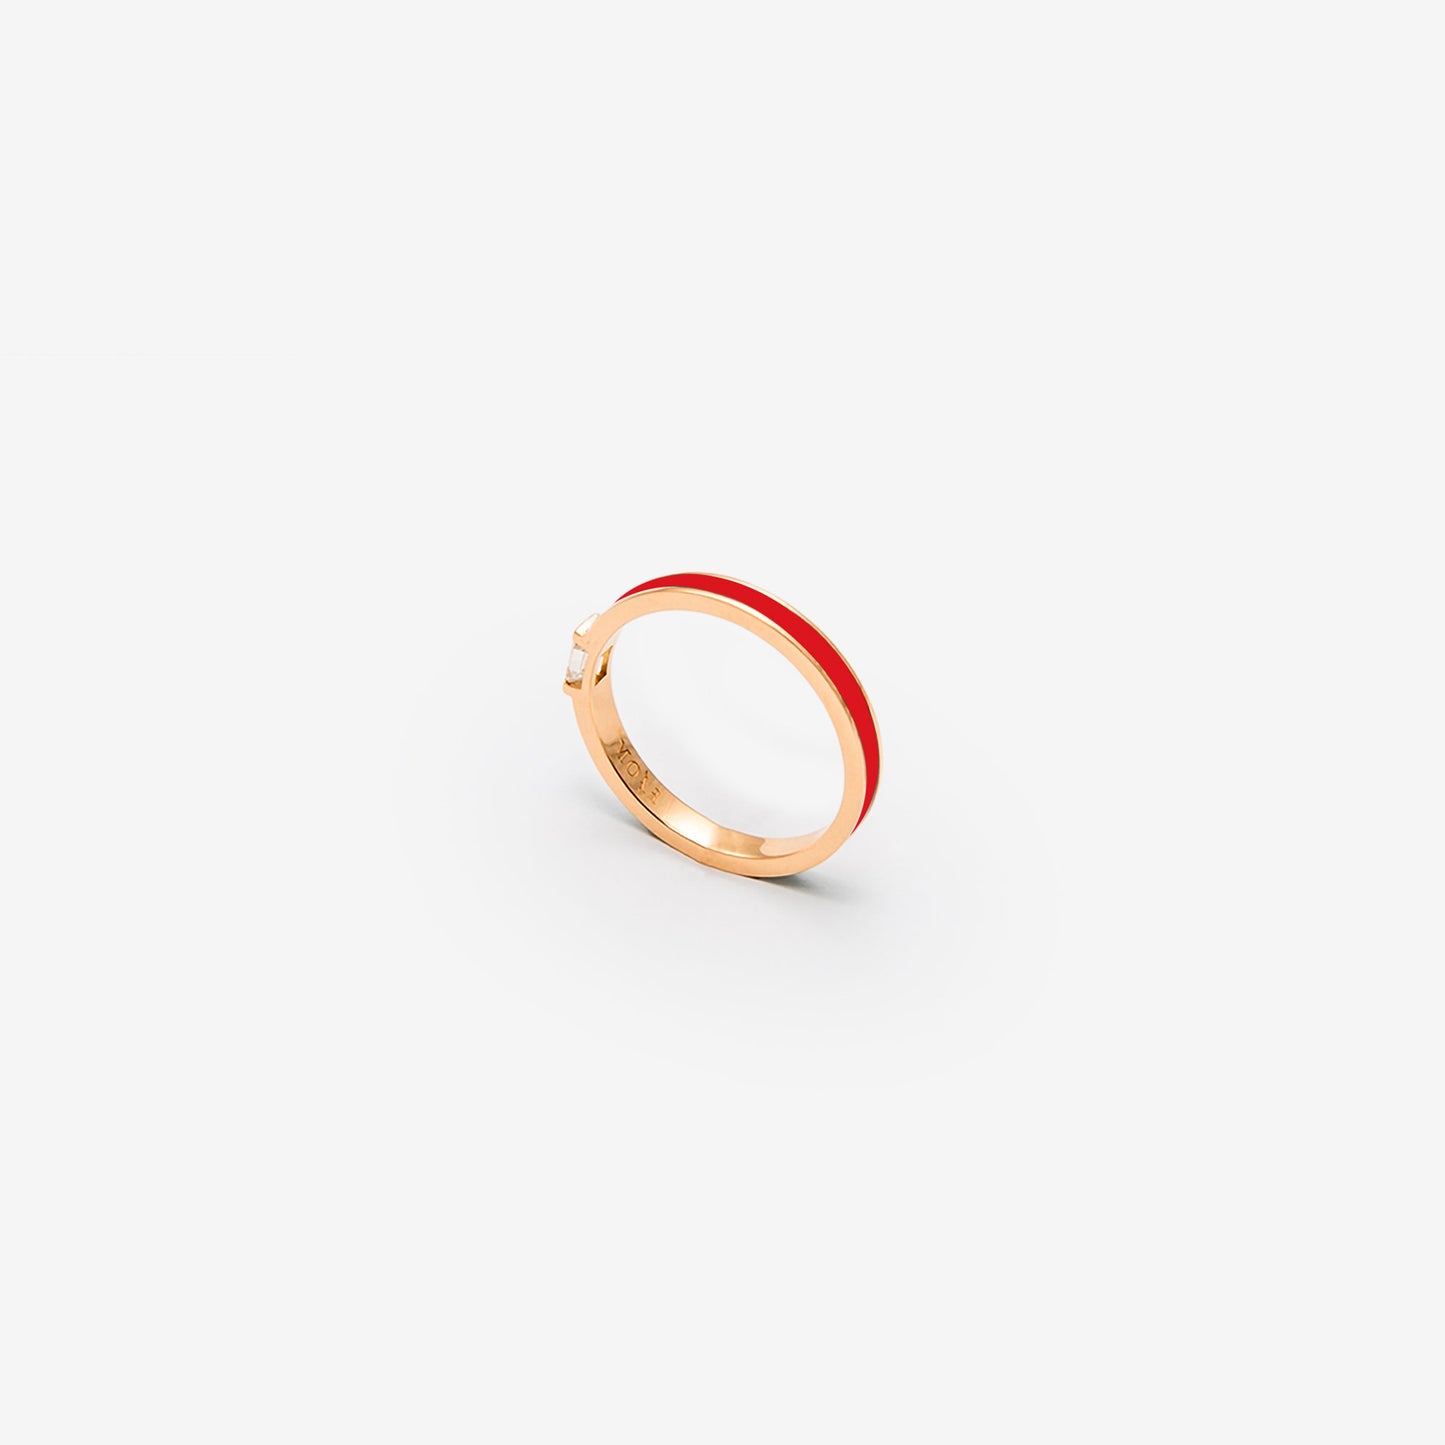 Rose gold band ring with red enamel and diamond